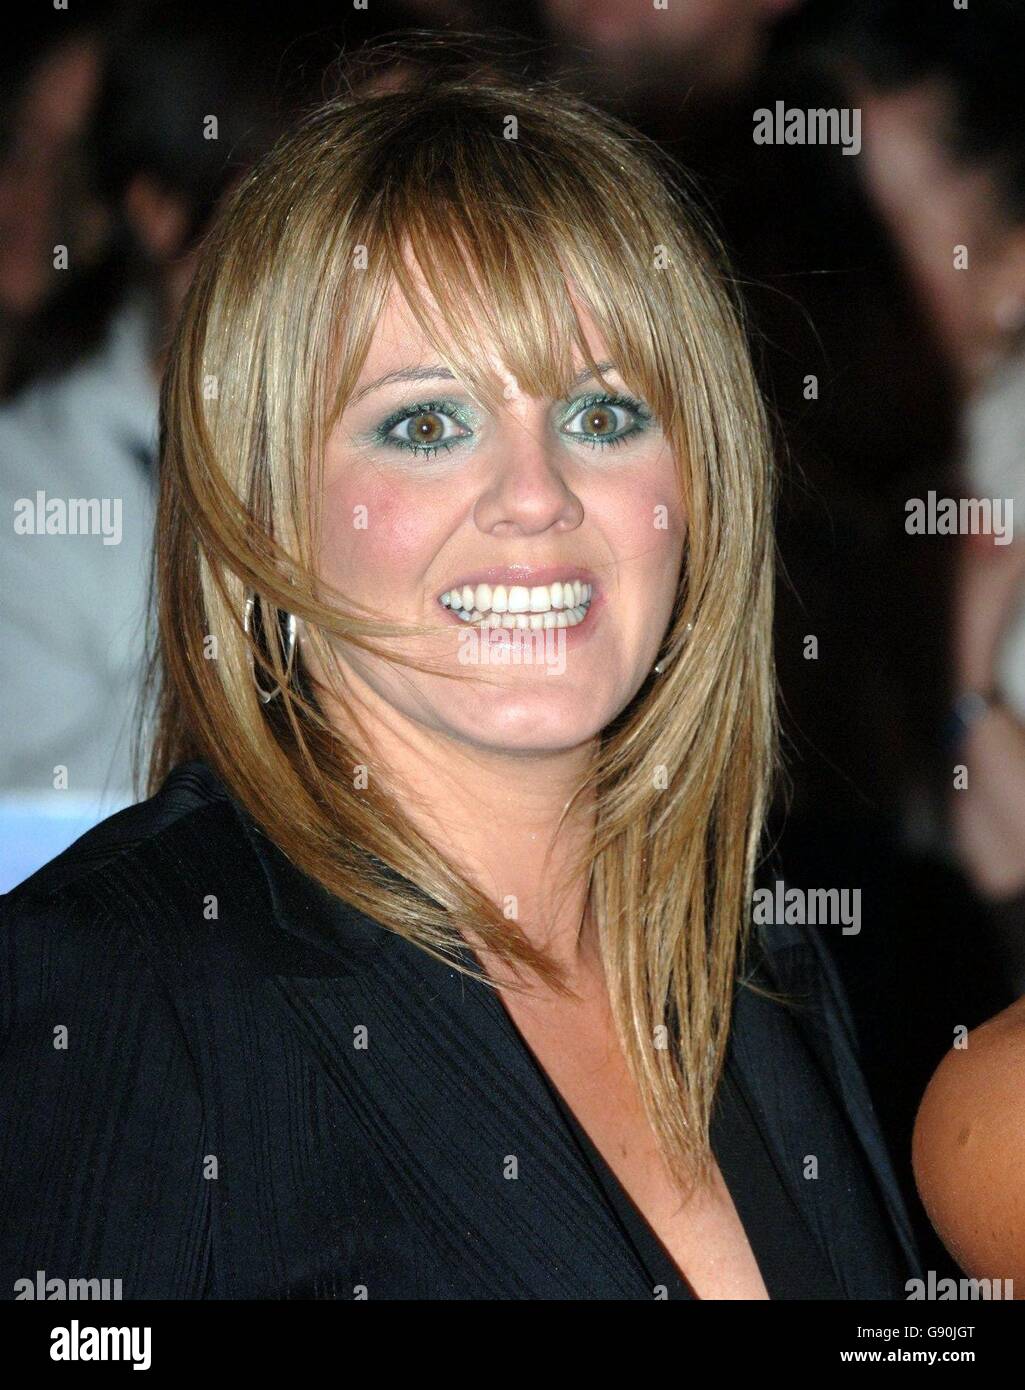 Sally Lindsay from Coronation Street arrives for the National Television Awards 2005 (NTA), at the Royal Albert Hall, central London. Stock Photo